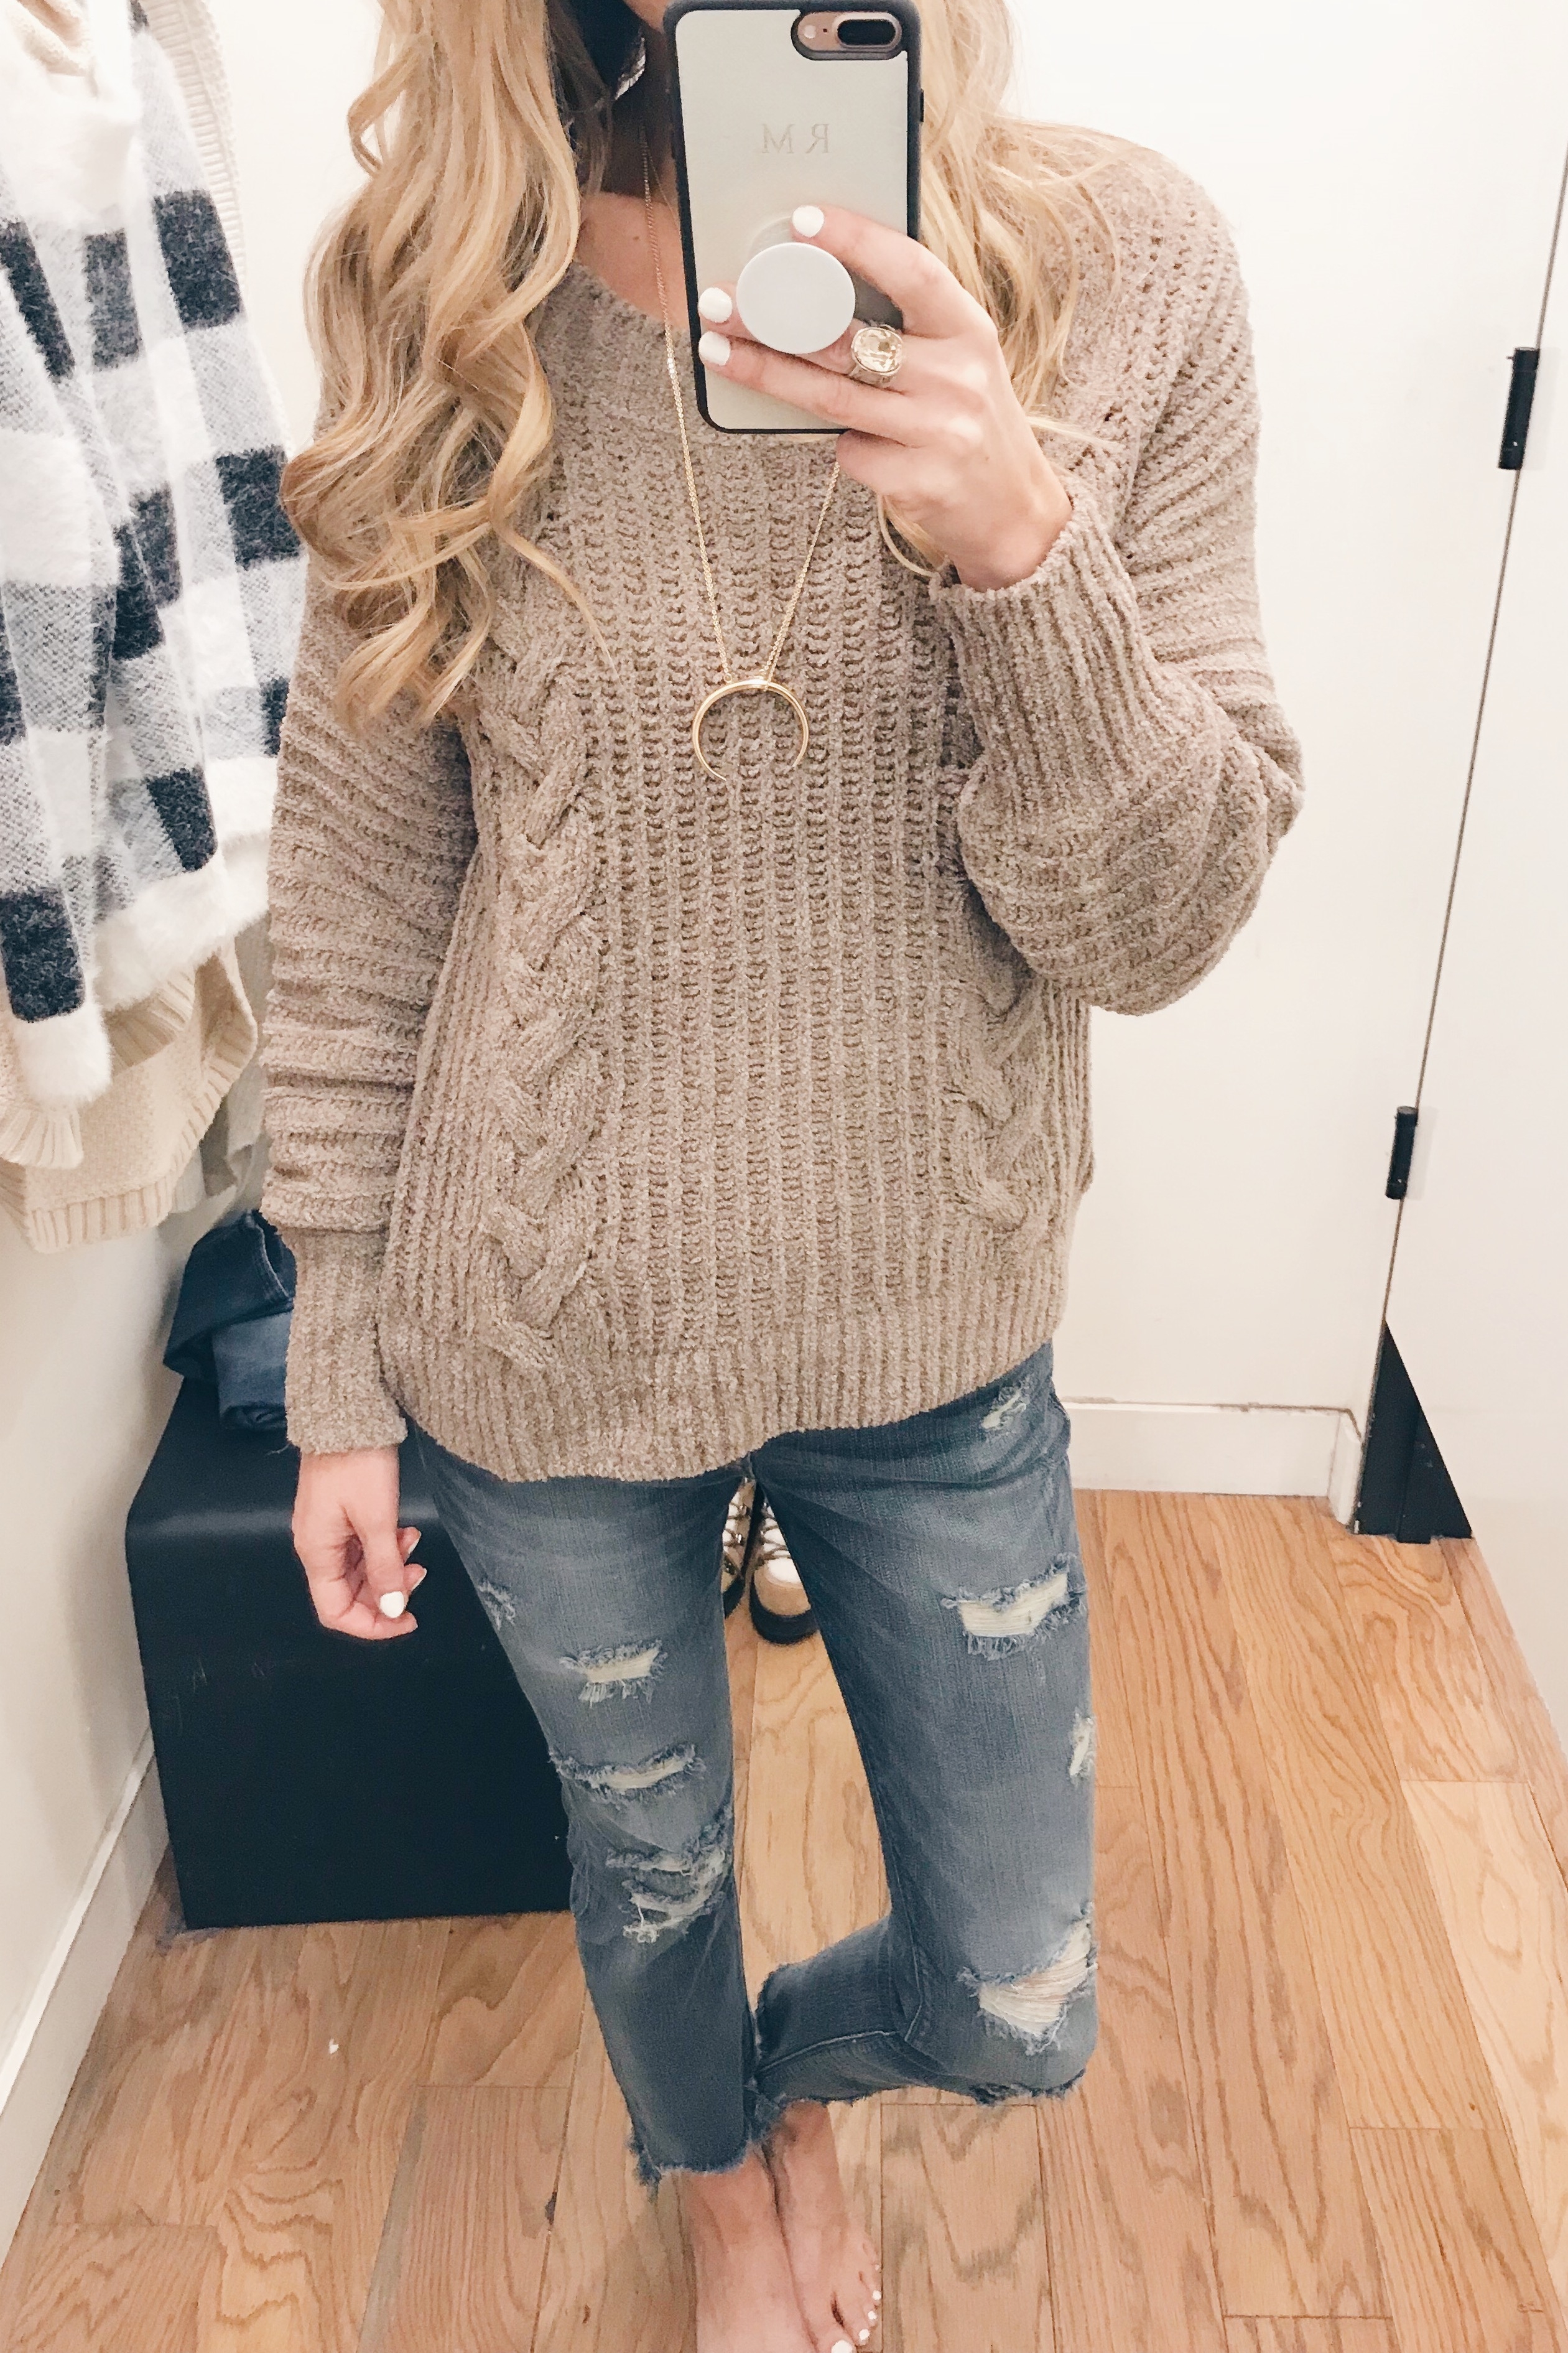 veteran's day weekend sale round up 2018 chenille cable knit taupe women's sweater 